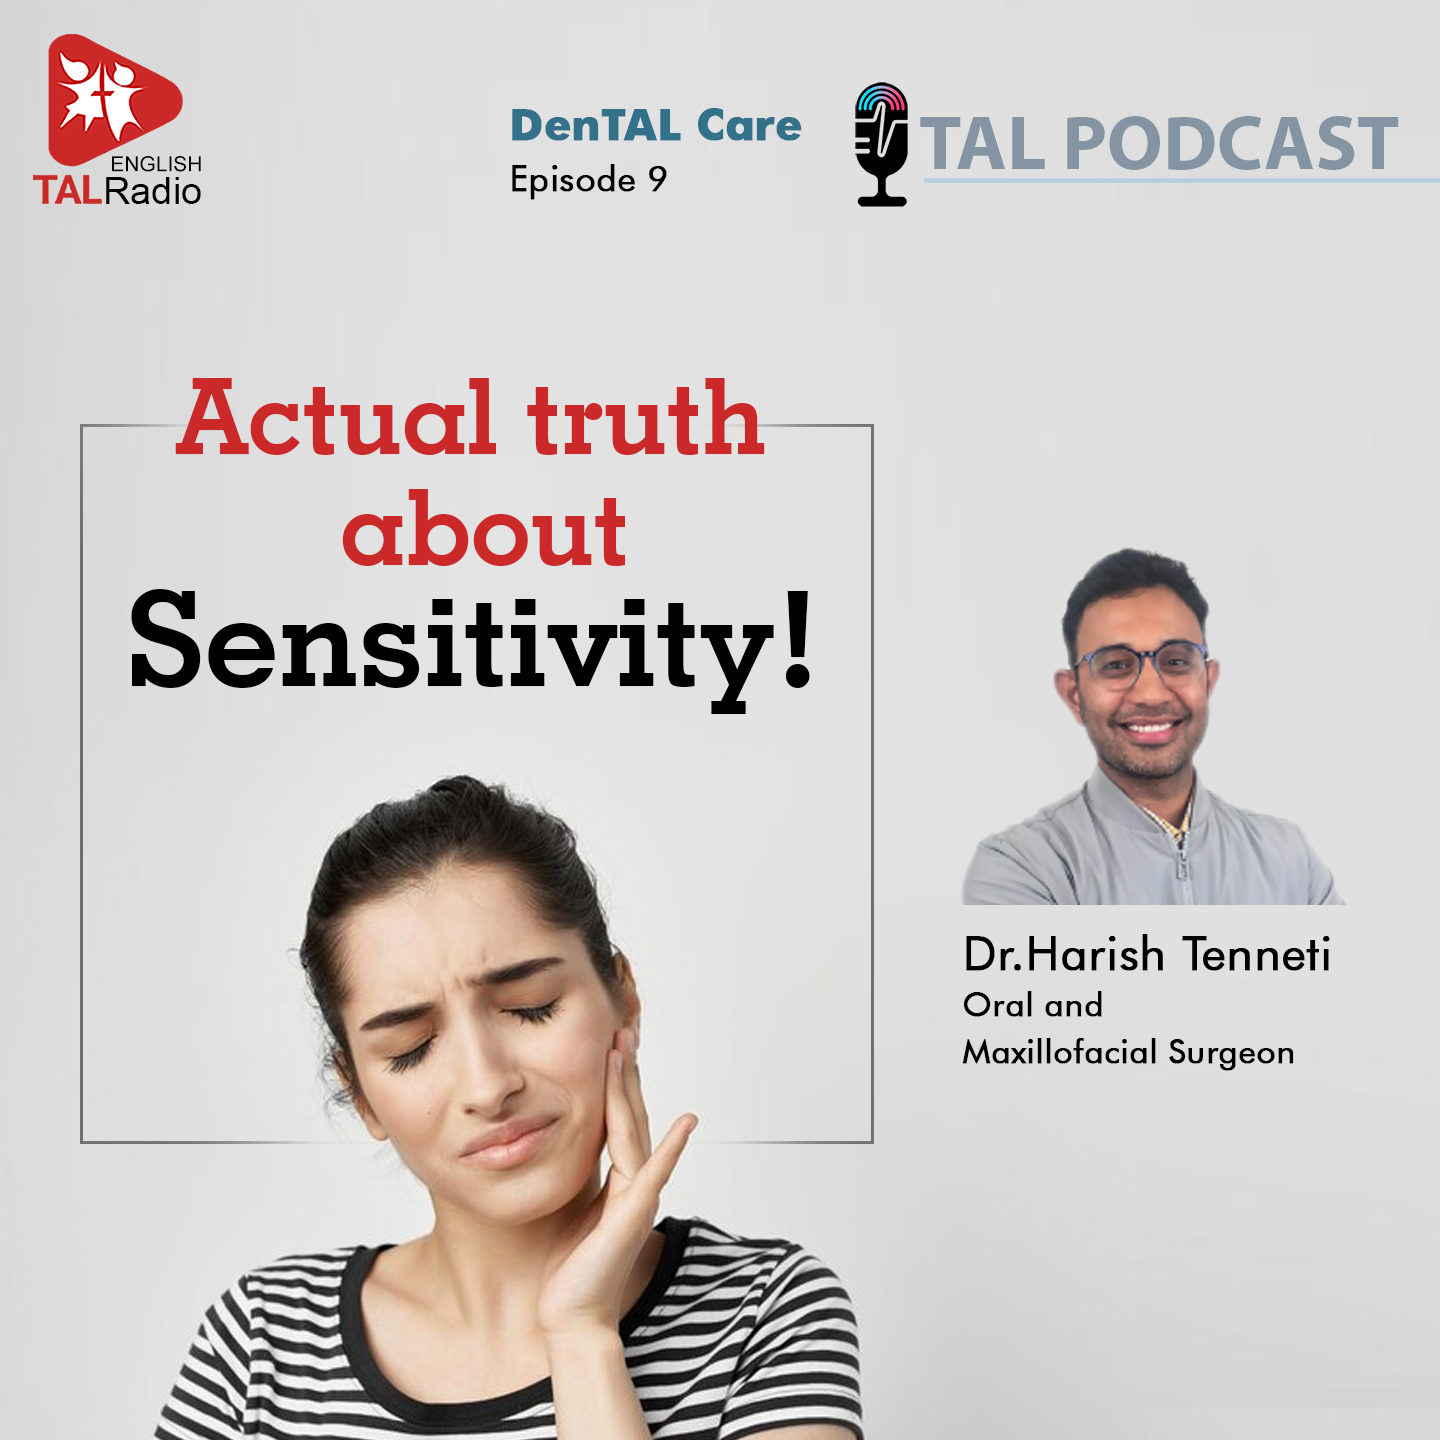 Actual truth about Sensitivity! | DenTAL Care - 9